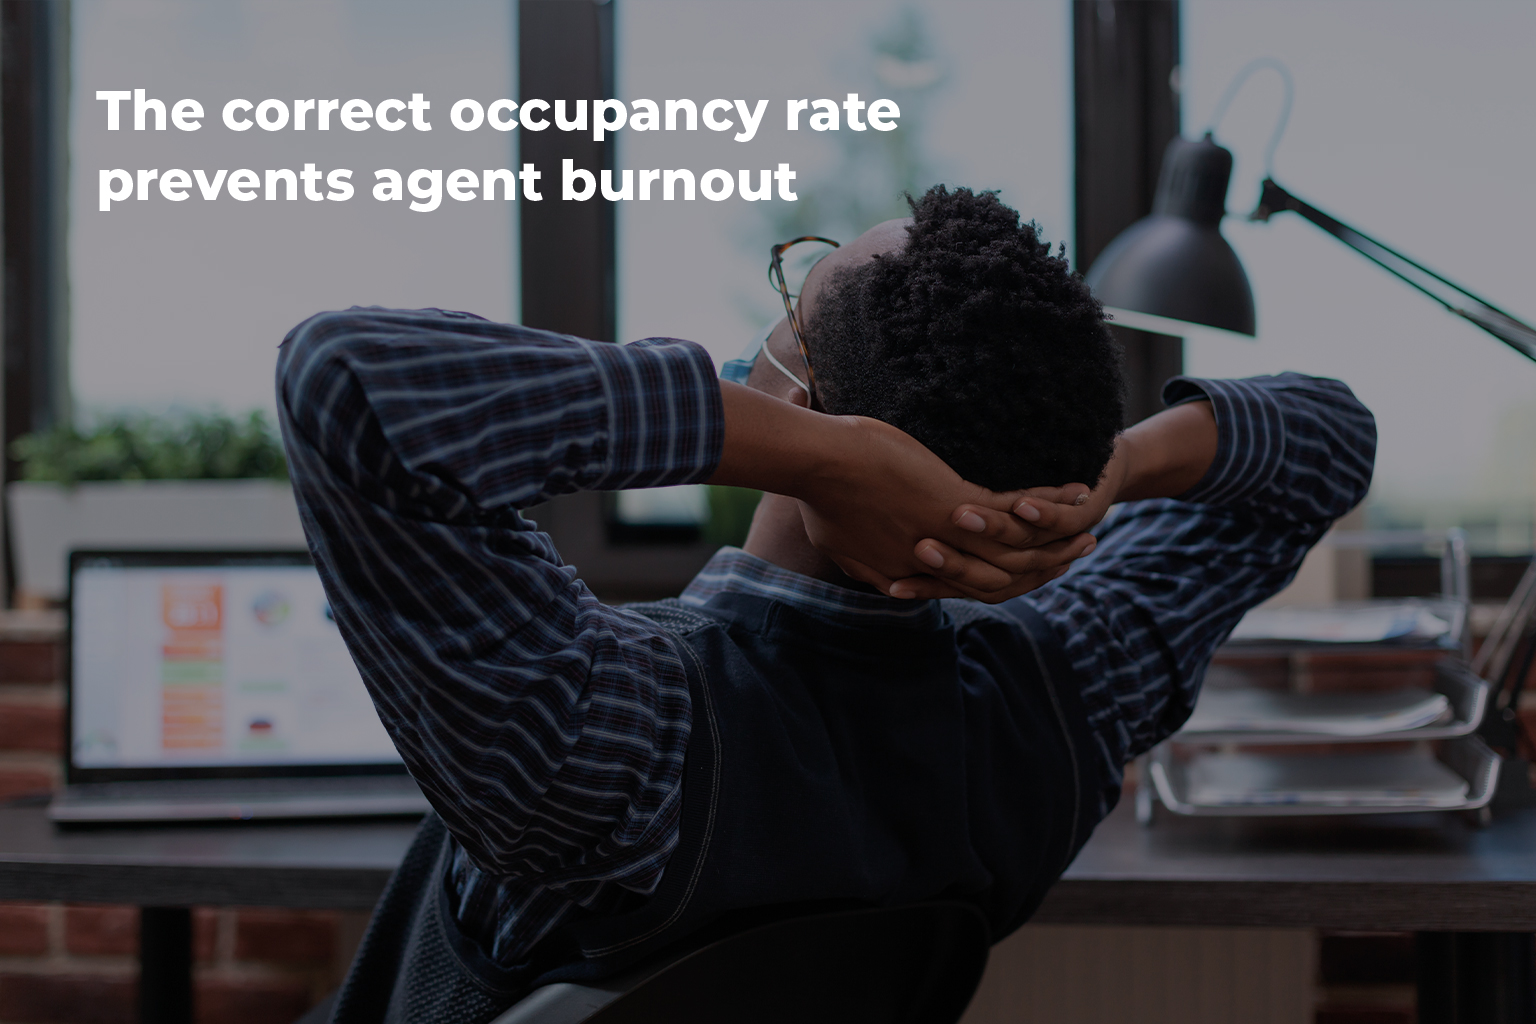 The correct occupancy rate prevents agent burnout.